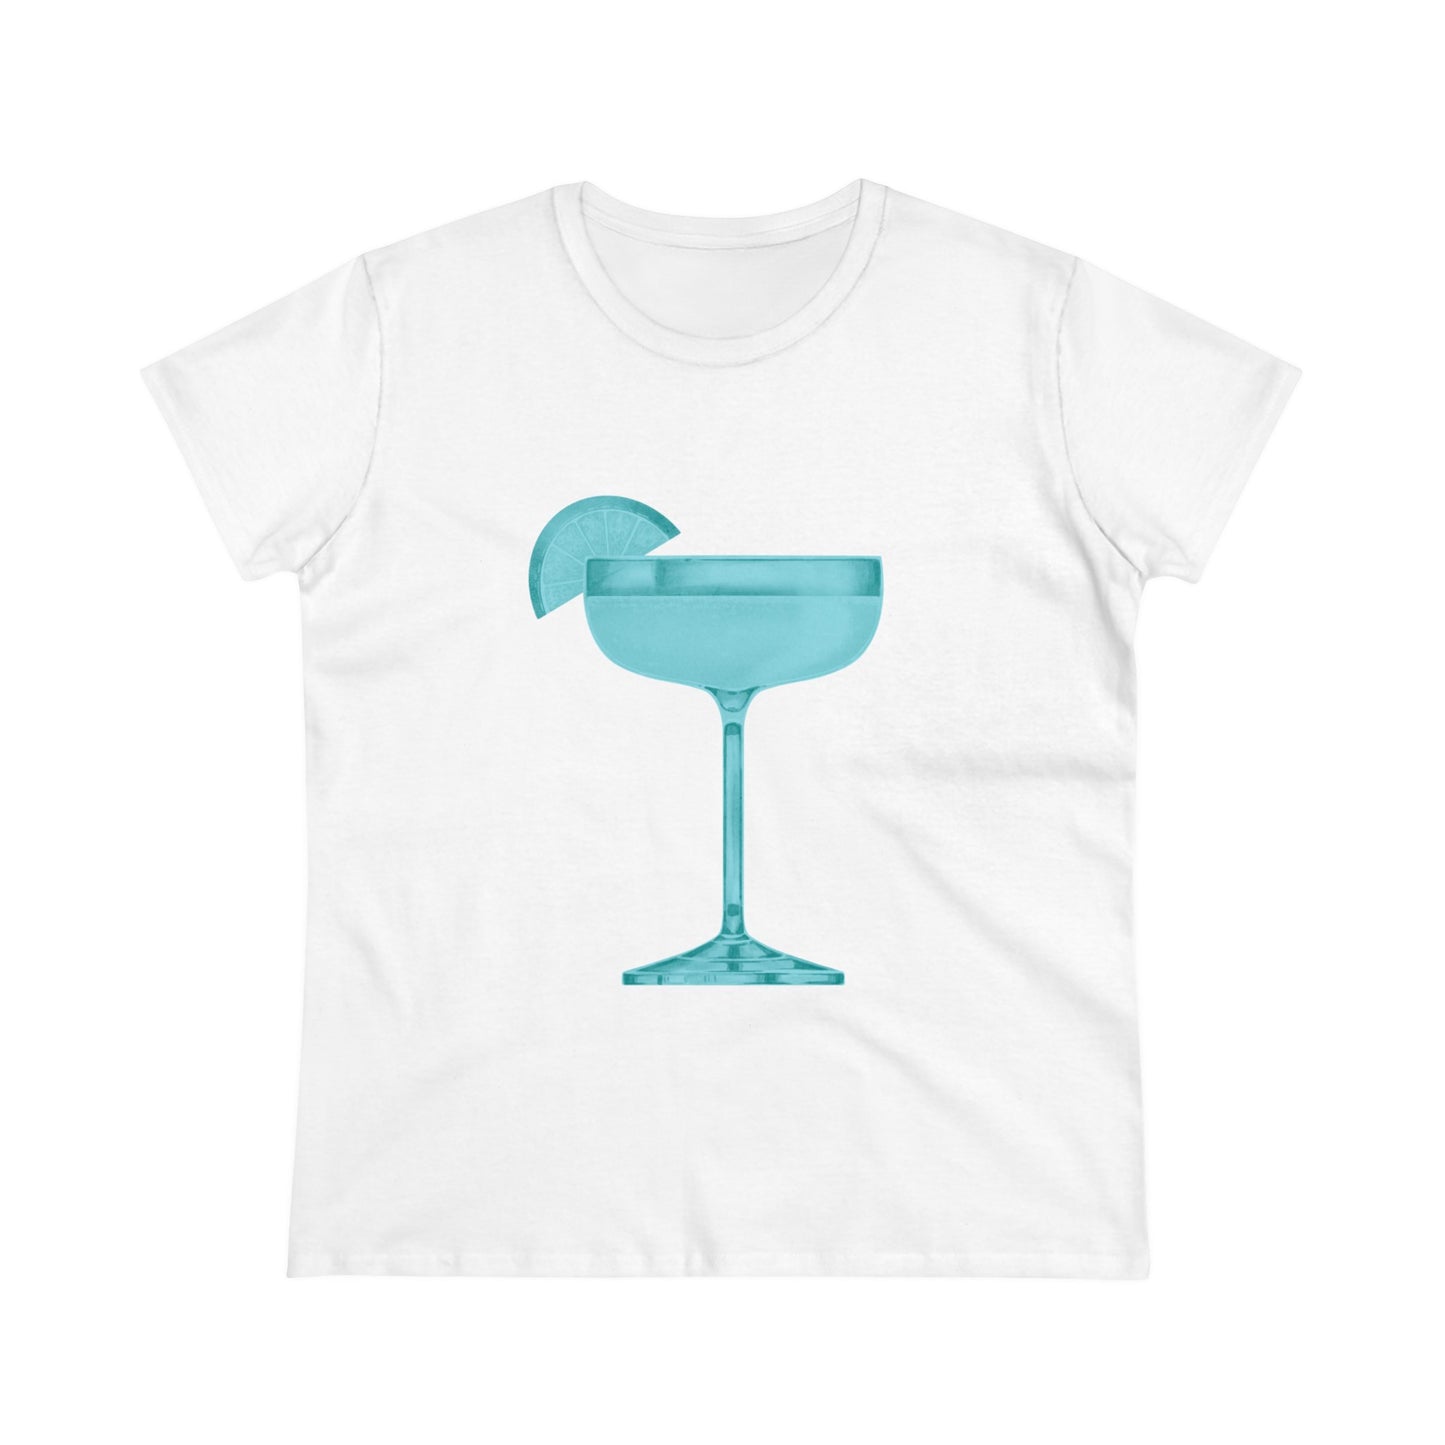 'pour me one of those' tee